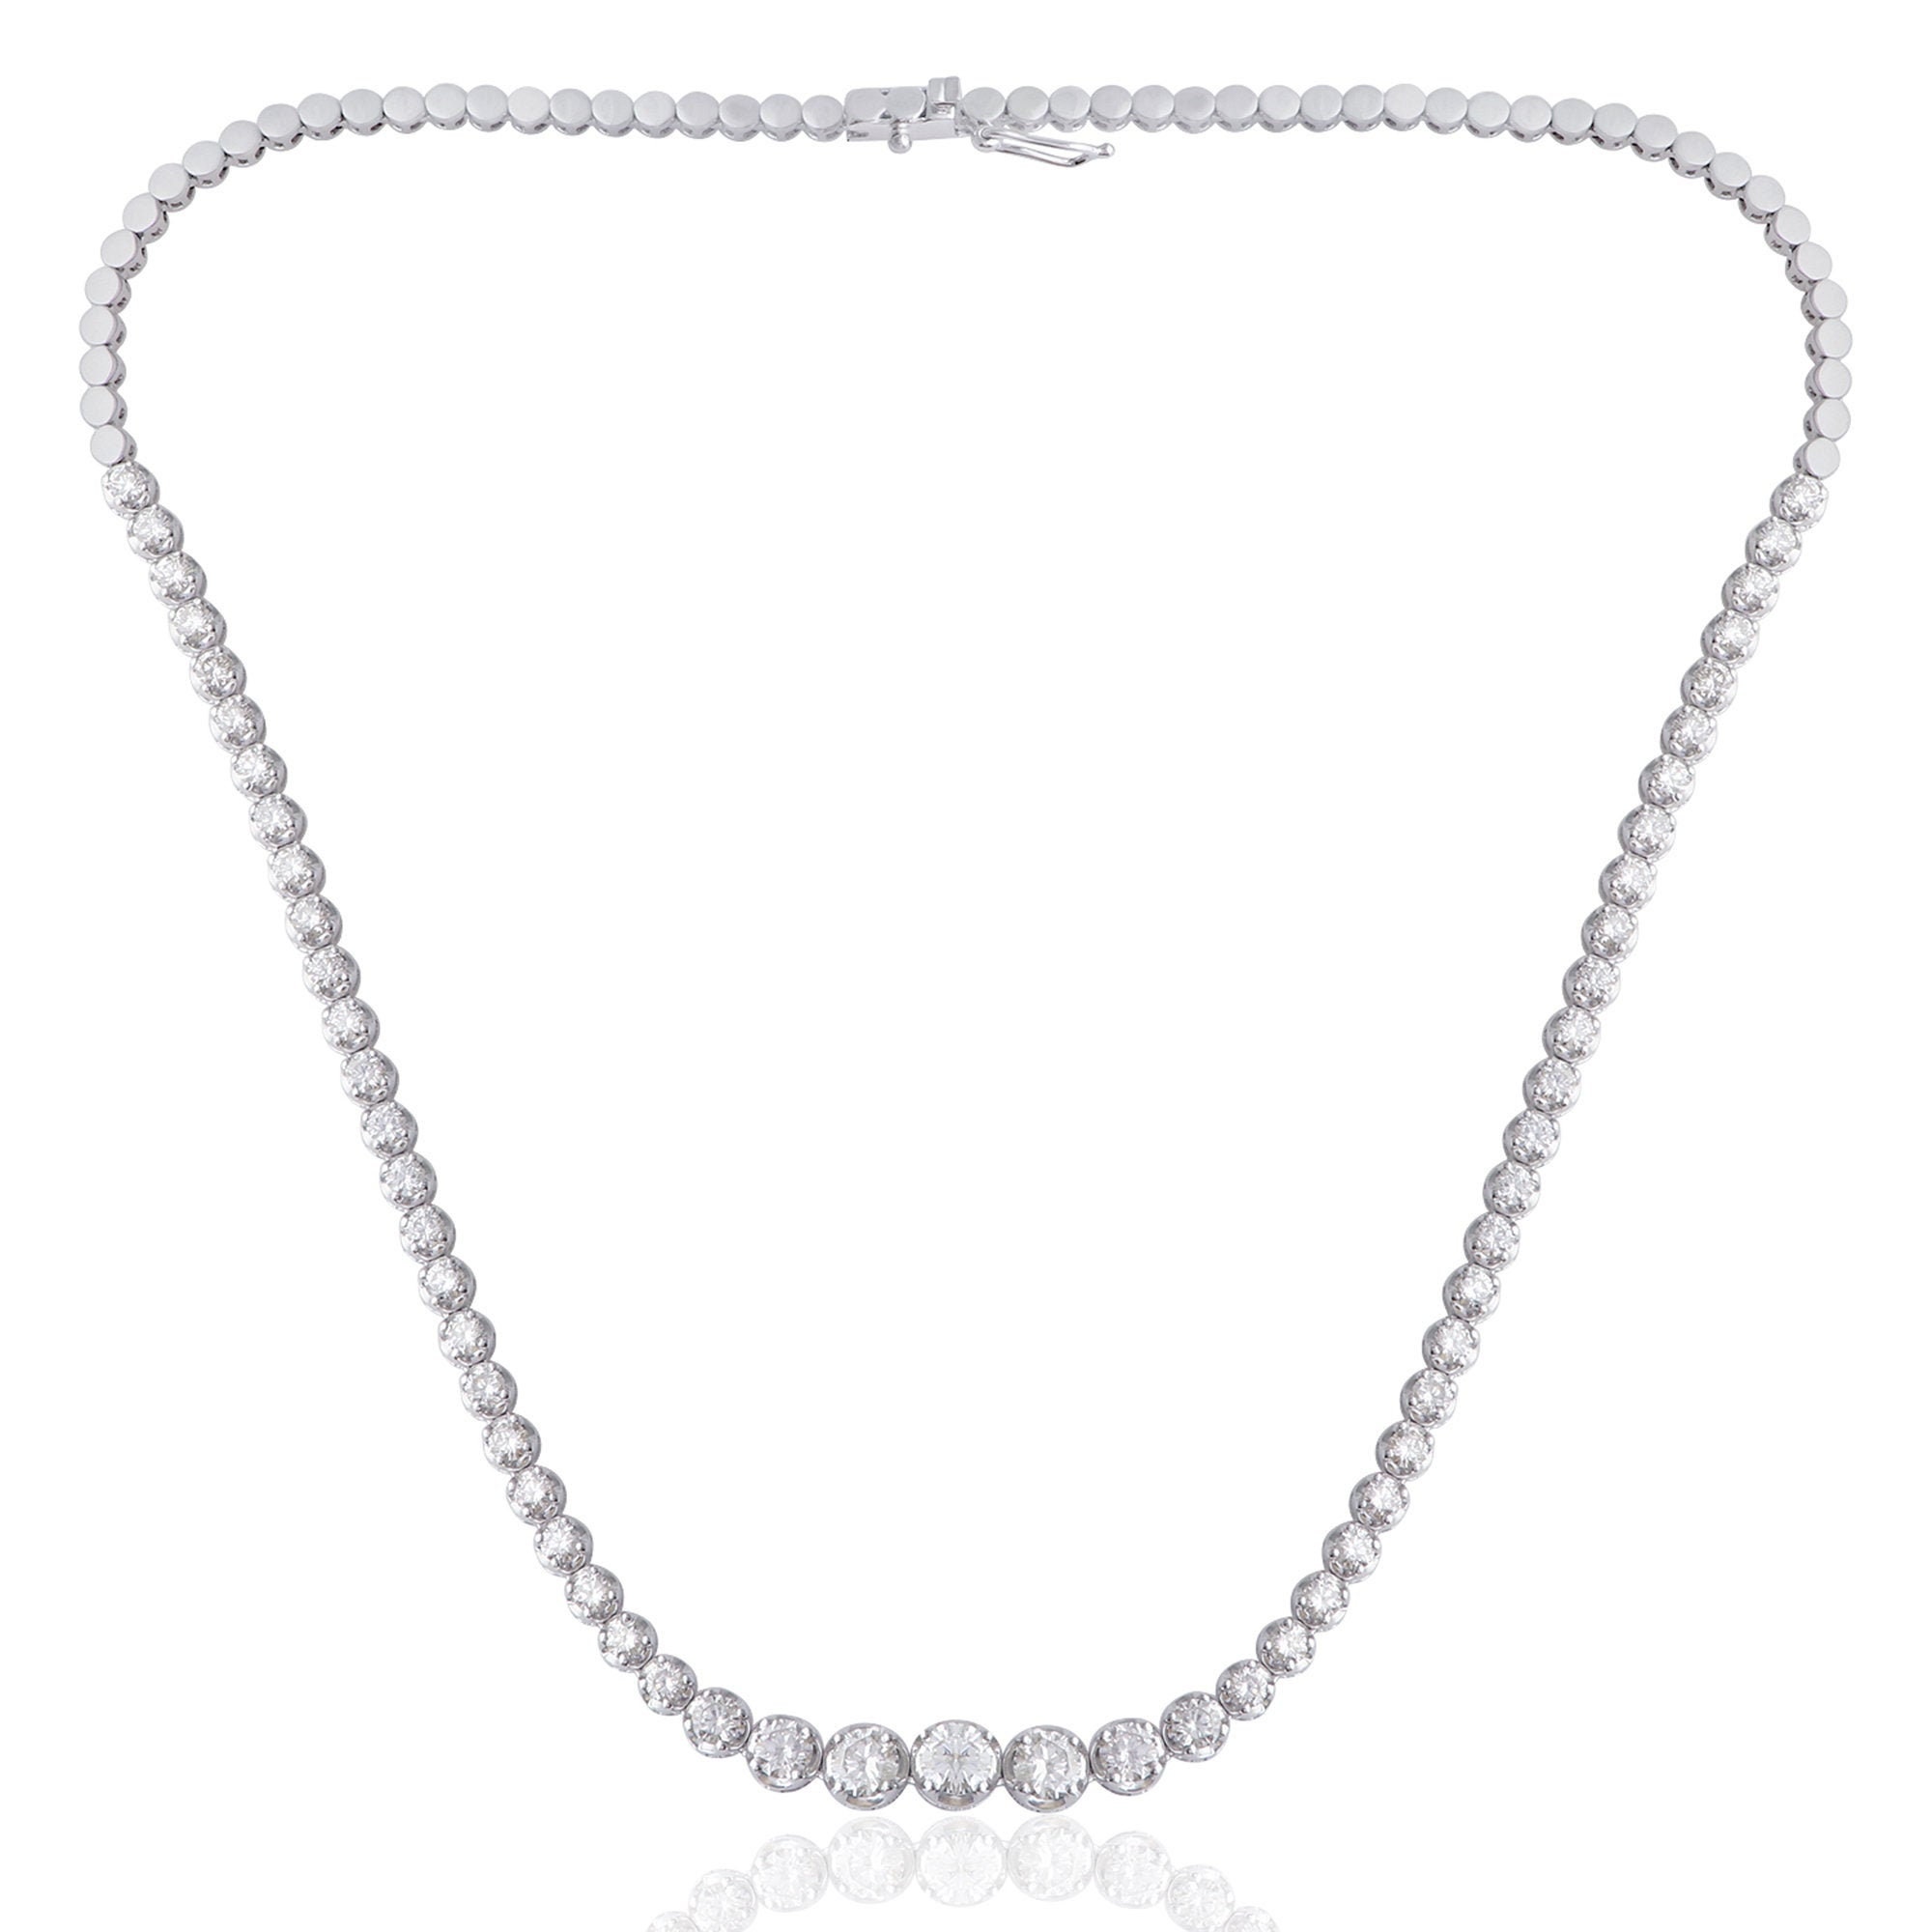 Natural 6.10 Tcw Si Clarity Hi Color Diamond Chain Necklace 14K White Gold Handmade Jewelry For Women